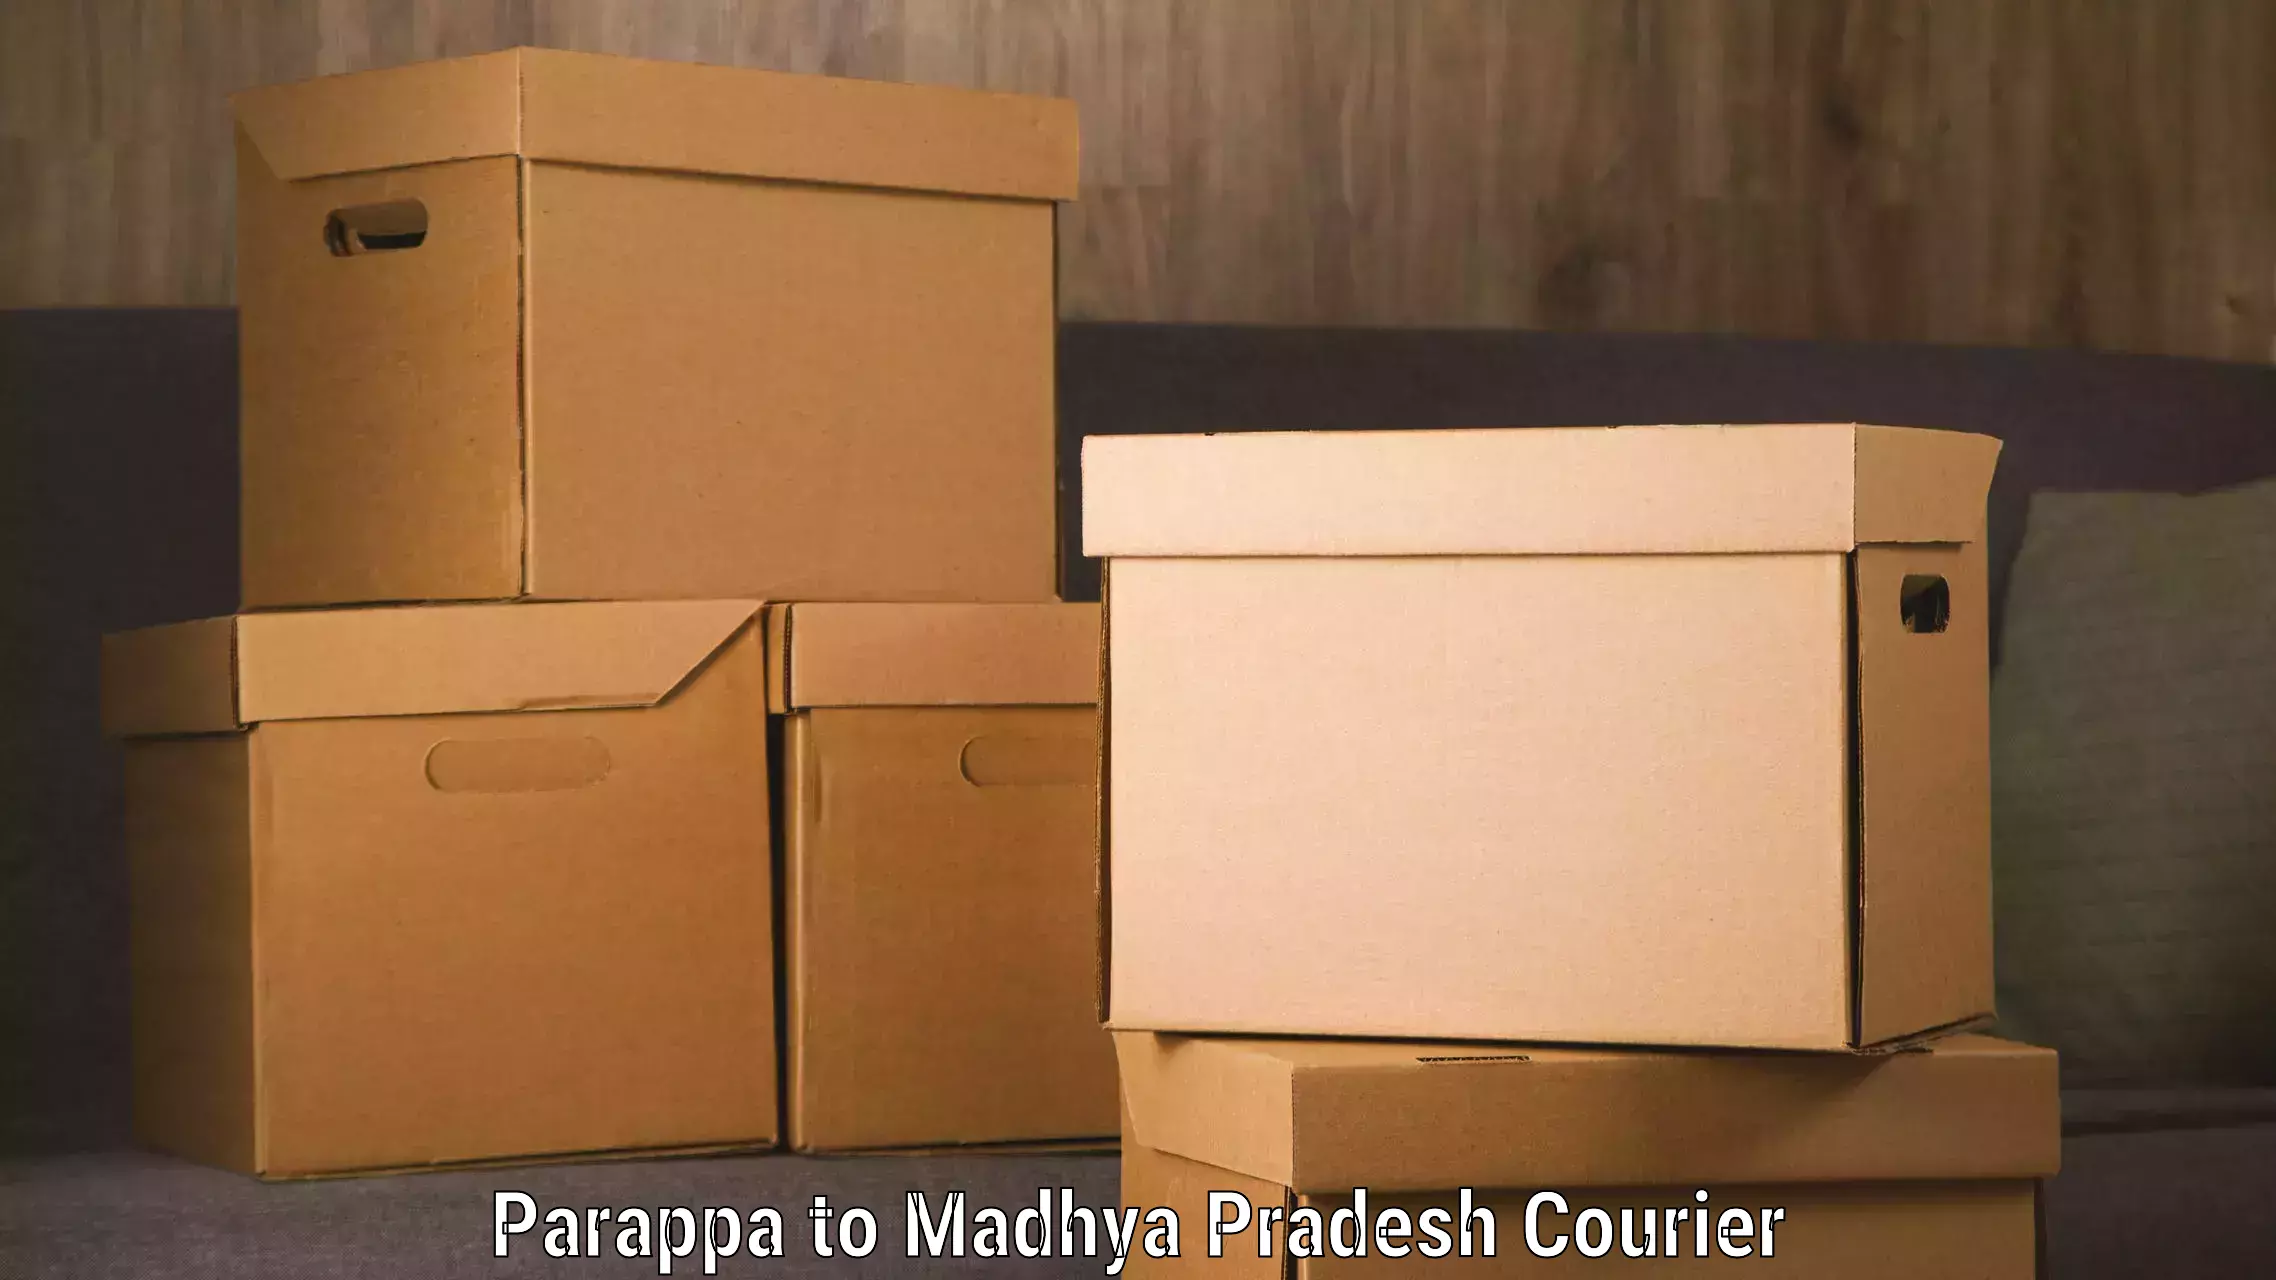 Reliable package handling Parappa to Chanderi